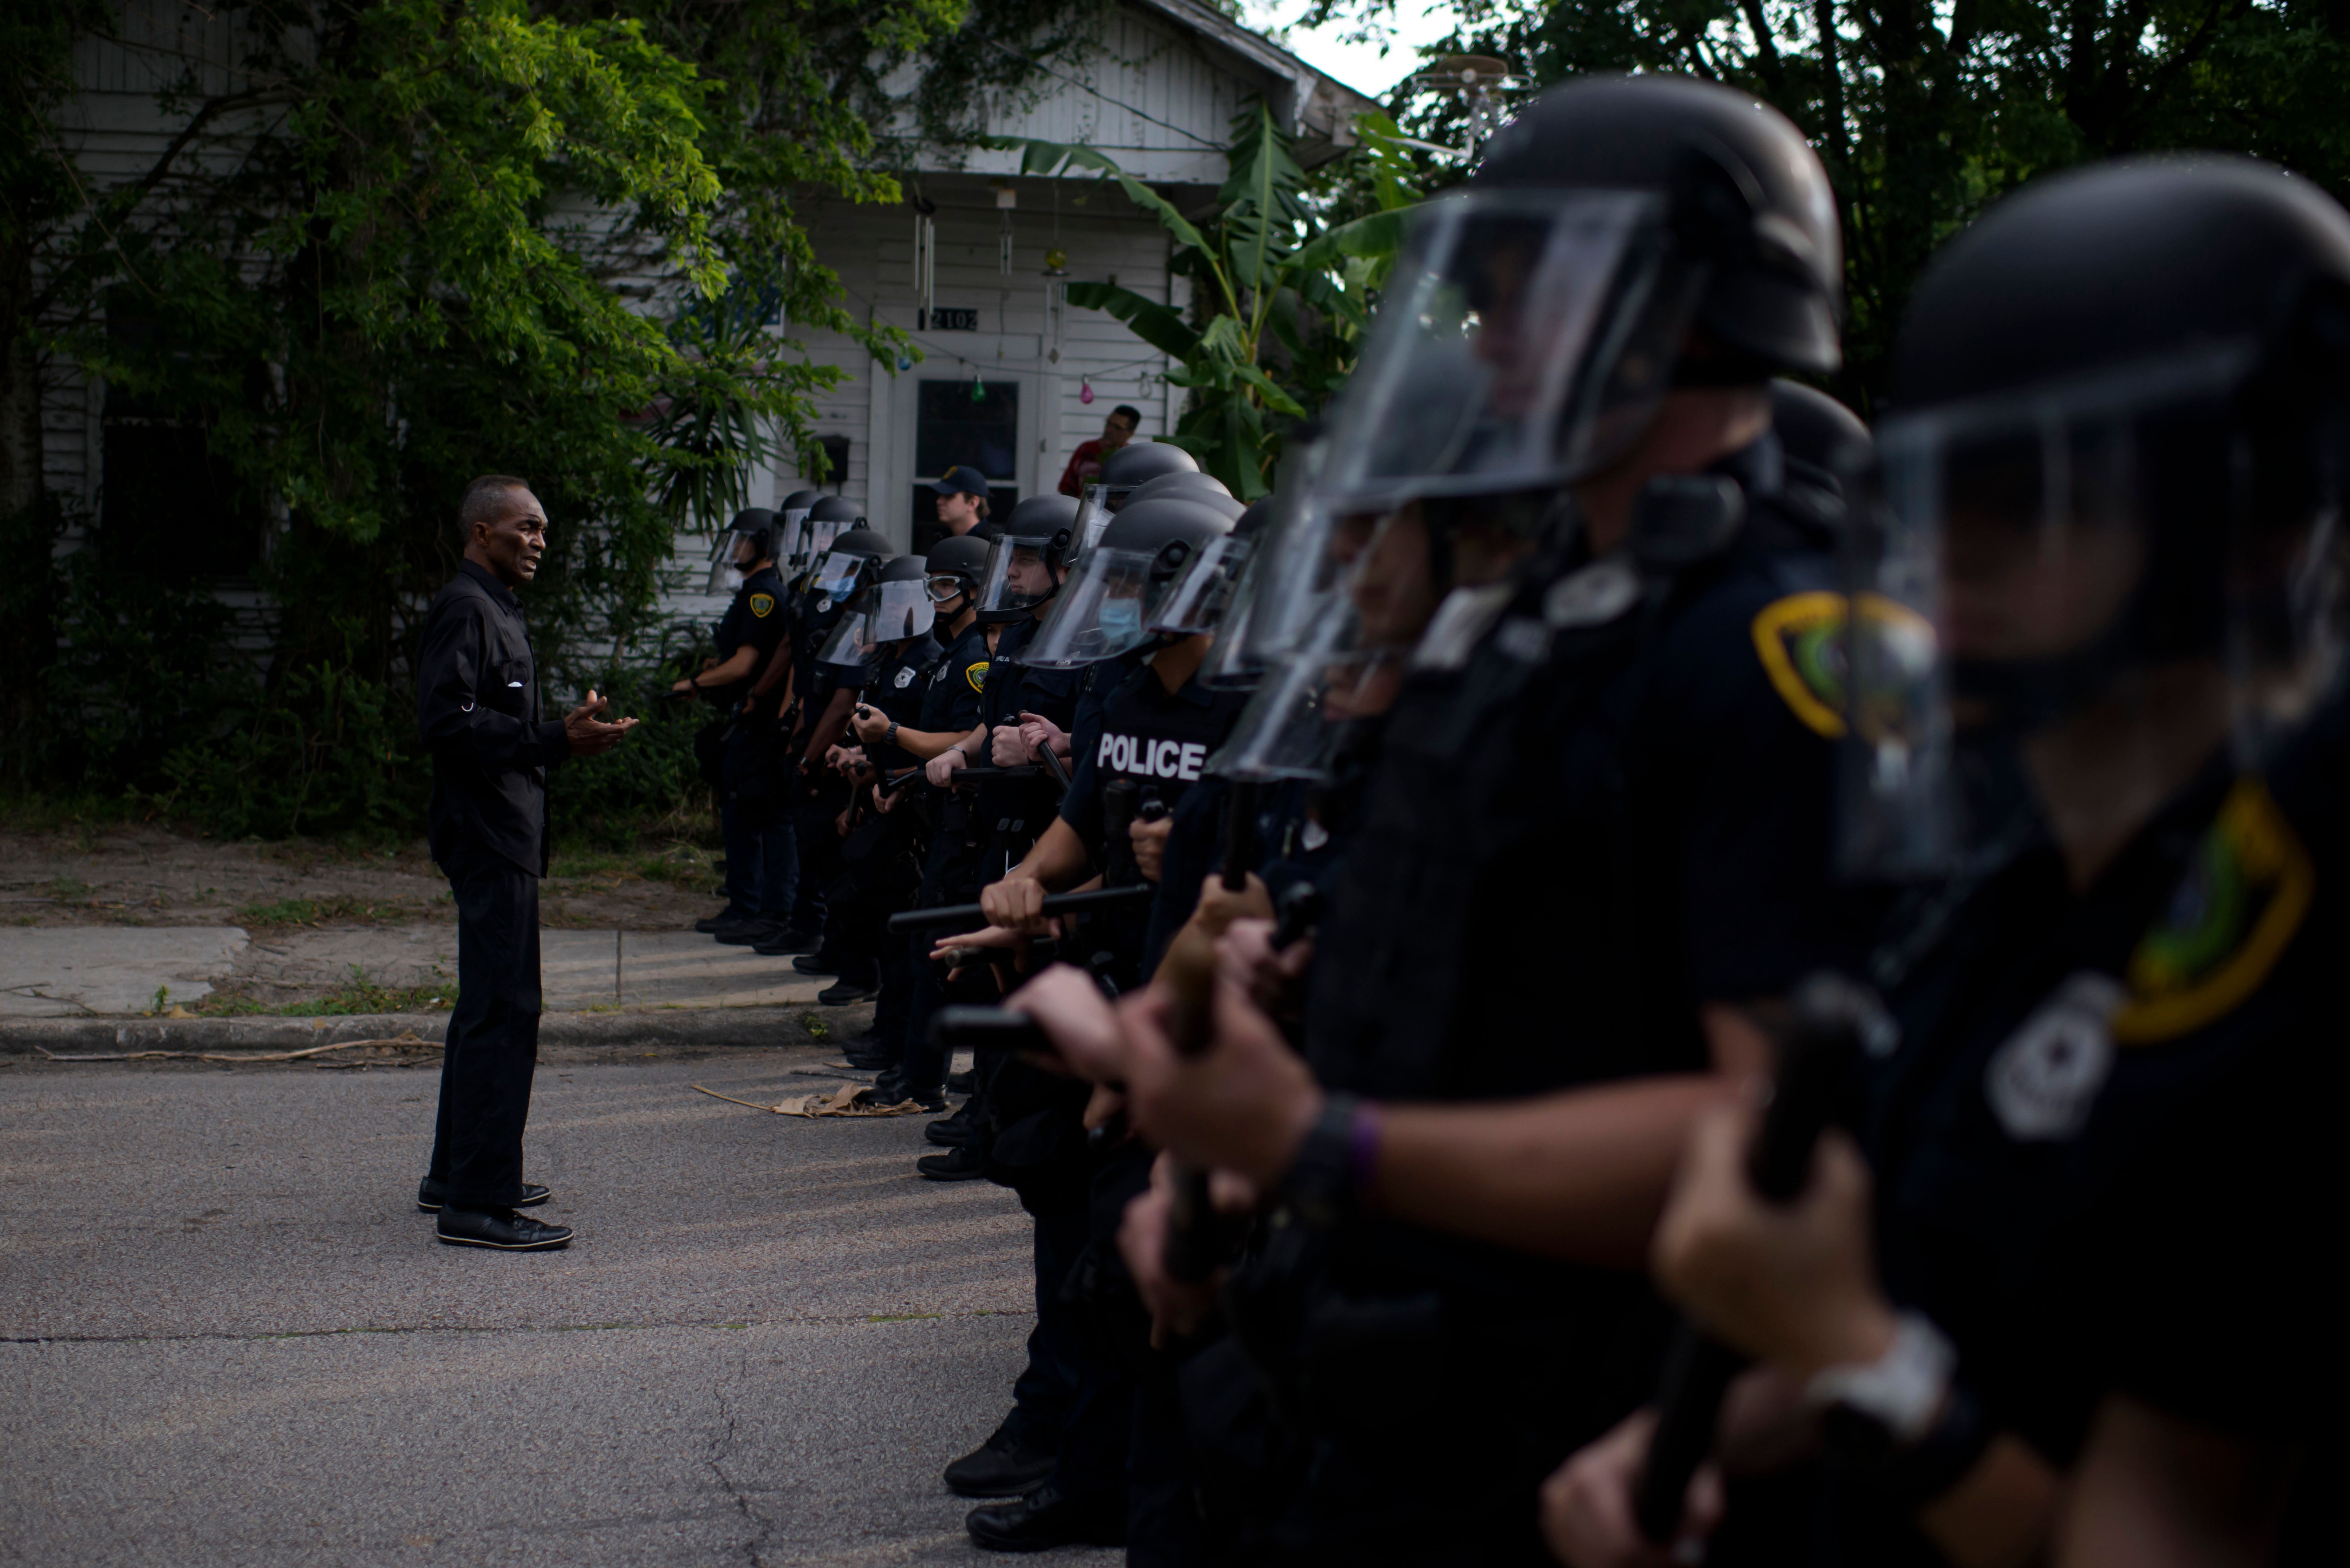 A man addresses a row of police officers during a "Justice for George Floyd" event in Houston, Texas on May 30, 2020, after George Floyd, an unarmed black, died while being arrested and pinned to the ground by a Minneapolis police officer. - Clashes broke out and major cities imposed curfews as America began another night of unrest Saturday with angry demonstrators ignoring warnings from President Donald Trump that his government would stop violent protests over police brutality "cold." (Photo by MARK FELIX/AFP via Getty Images)